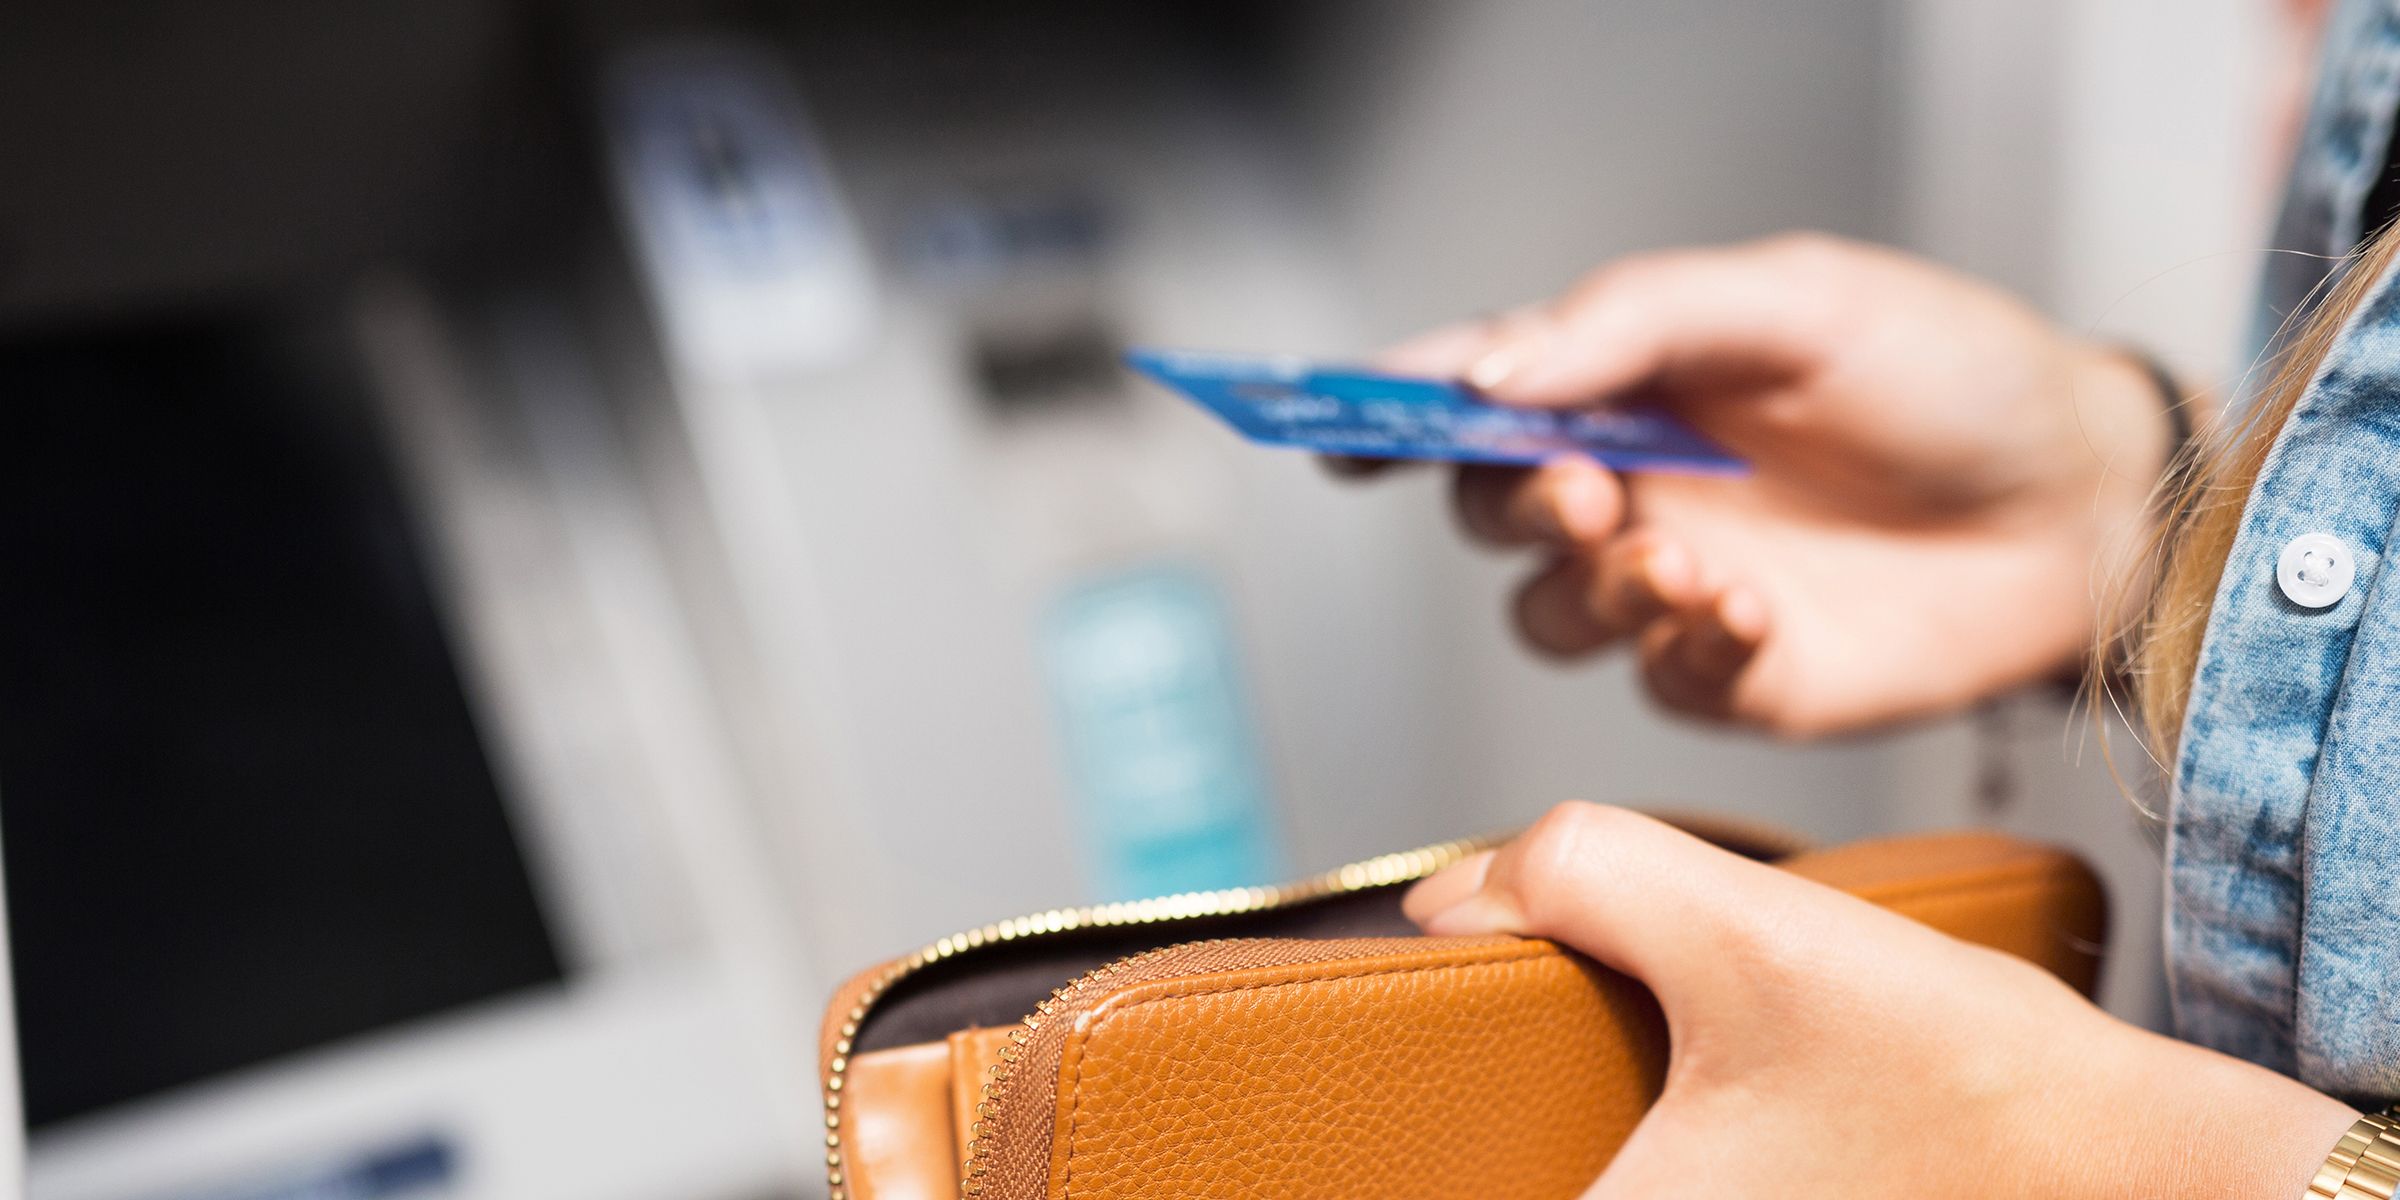 a person holding a purse in one hand and another electronic card